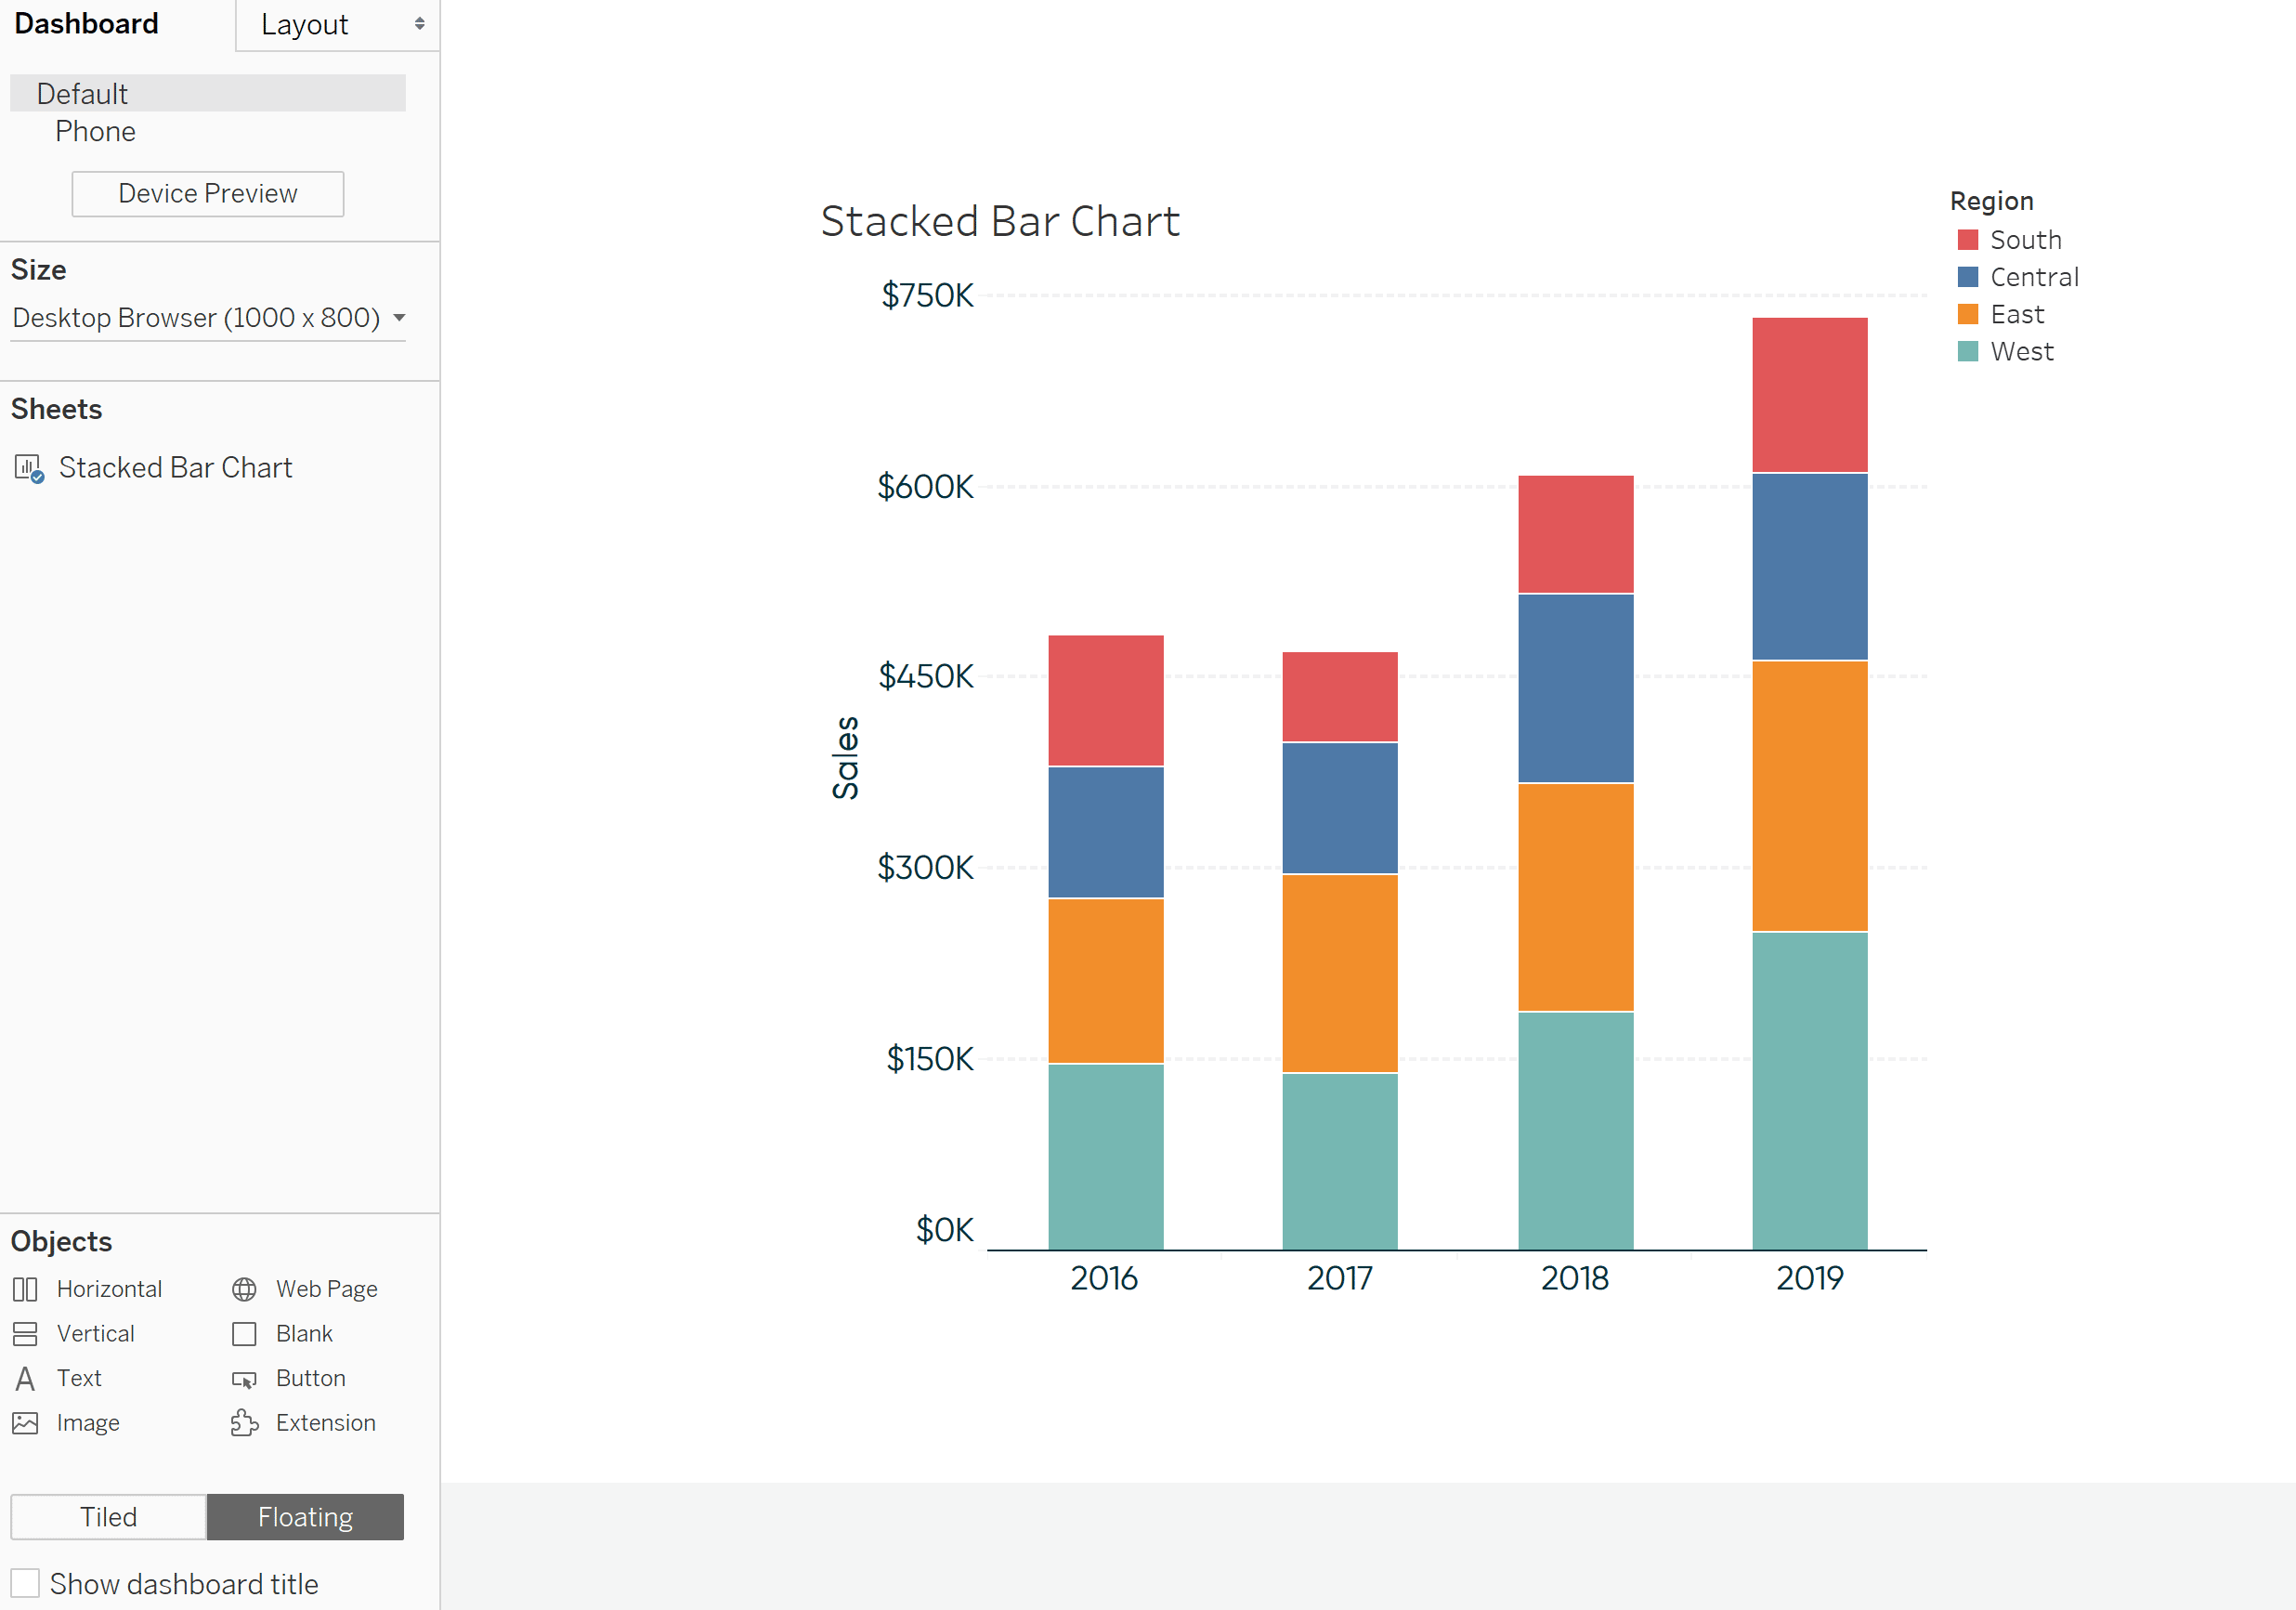 How to Reorder Stacked Bars on the Fly in Tableau | Playfair Data